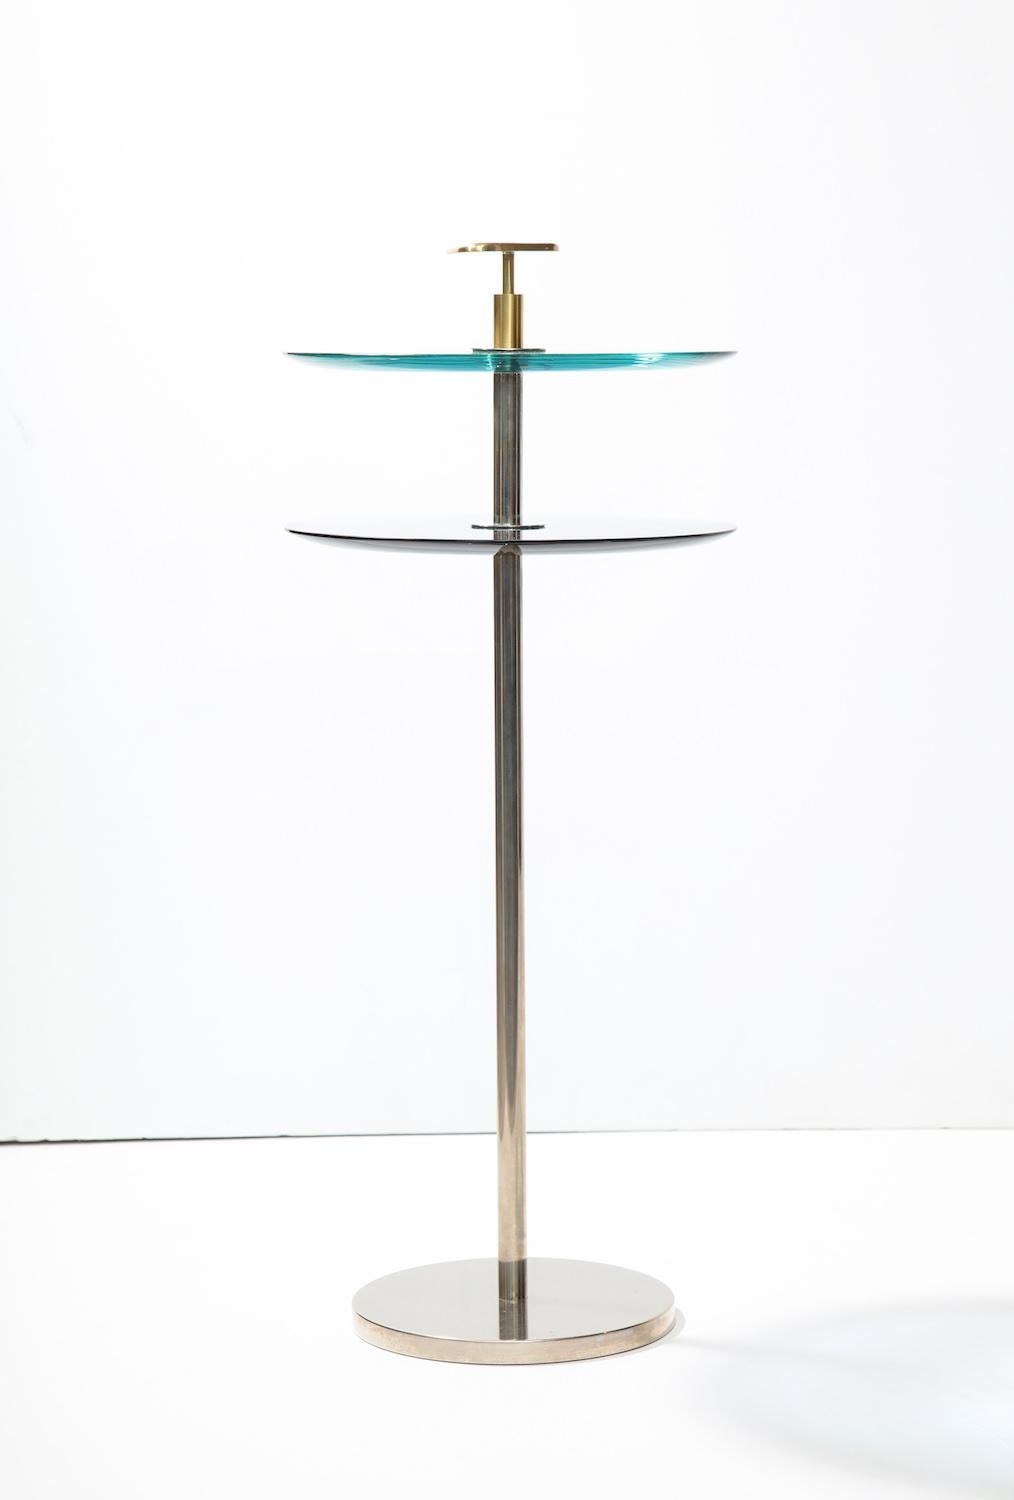 2-tier side table By Robert Giulio Rida. Elegant table with 1 blue glass surface and one clear glass surface. Nickeled brass base and polished brass finial. Signed by artist. 2nd matching tables available.